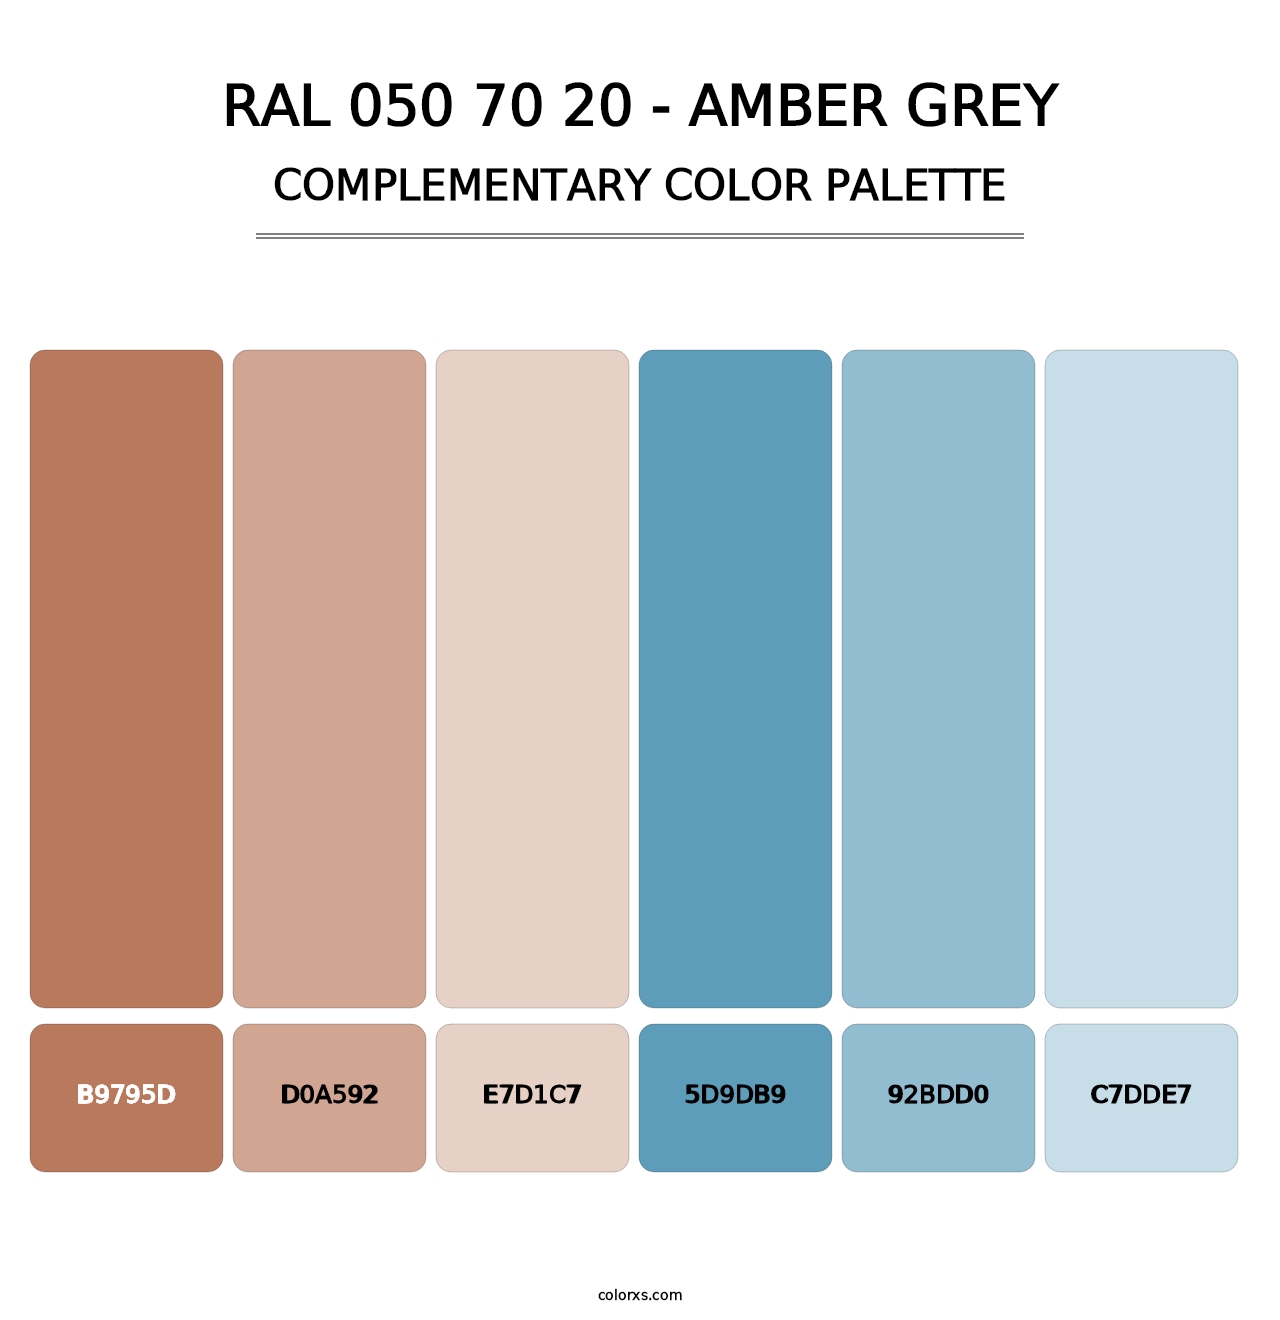 RAL 050 70 20 - Amber Grey - Complementary Color Palette